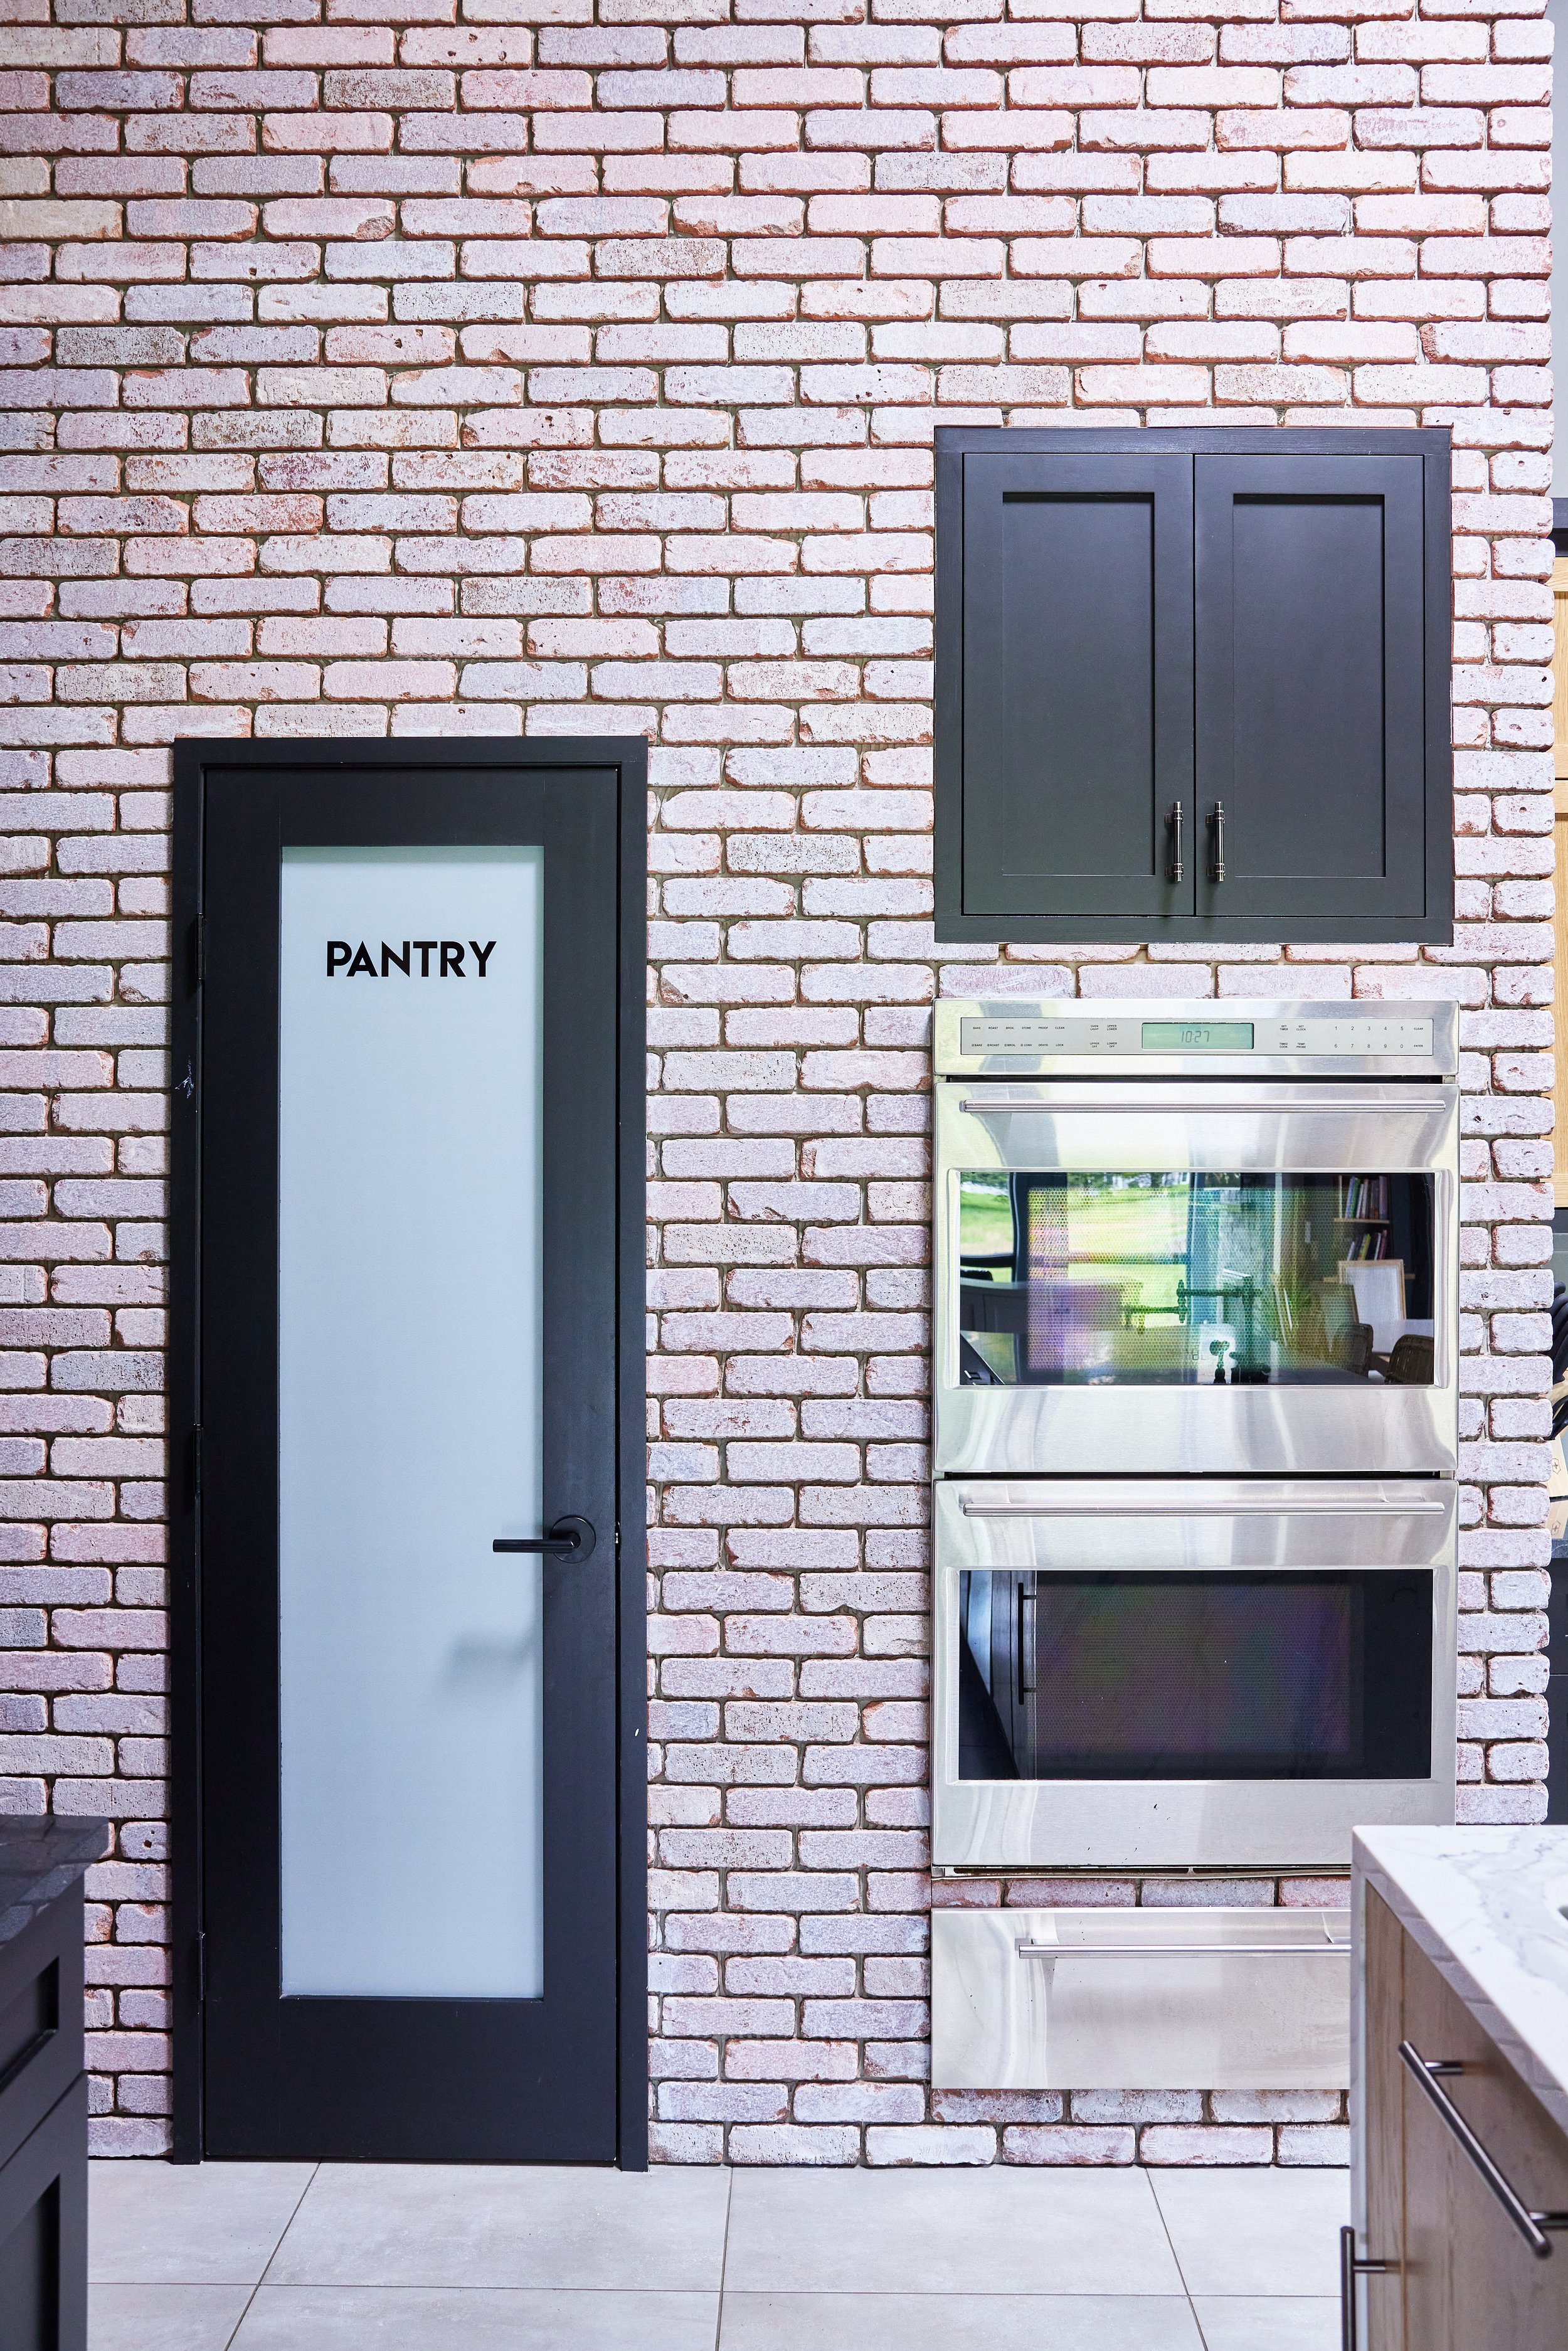 Chris ODell's House Kitchen Pantry Wall Ovens Brick Vertical.jpg